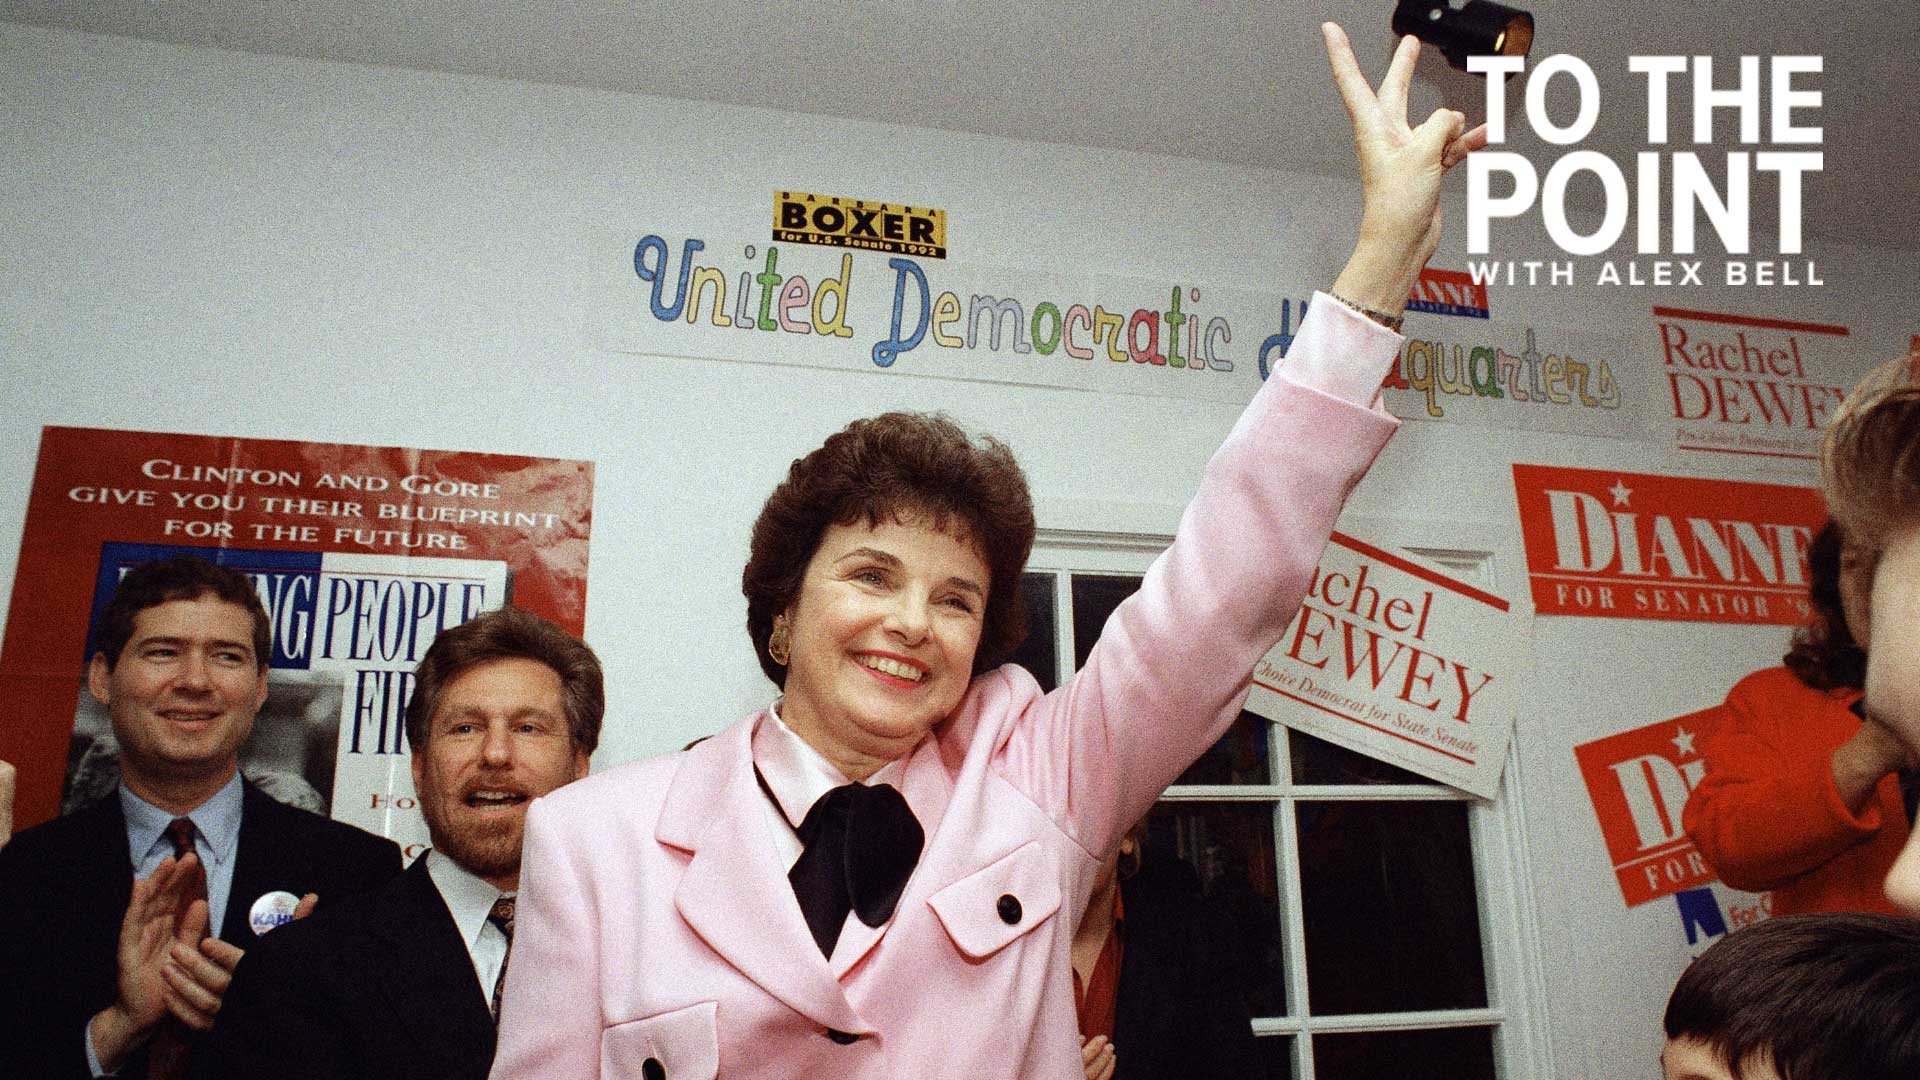 From a San Francisco Board Supervisor to a U.S. Senator elected during the 'Year of the Woman,' Dianne Feinstein was a trailblazer in politics.